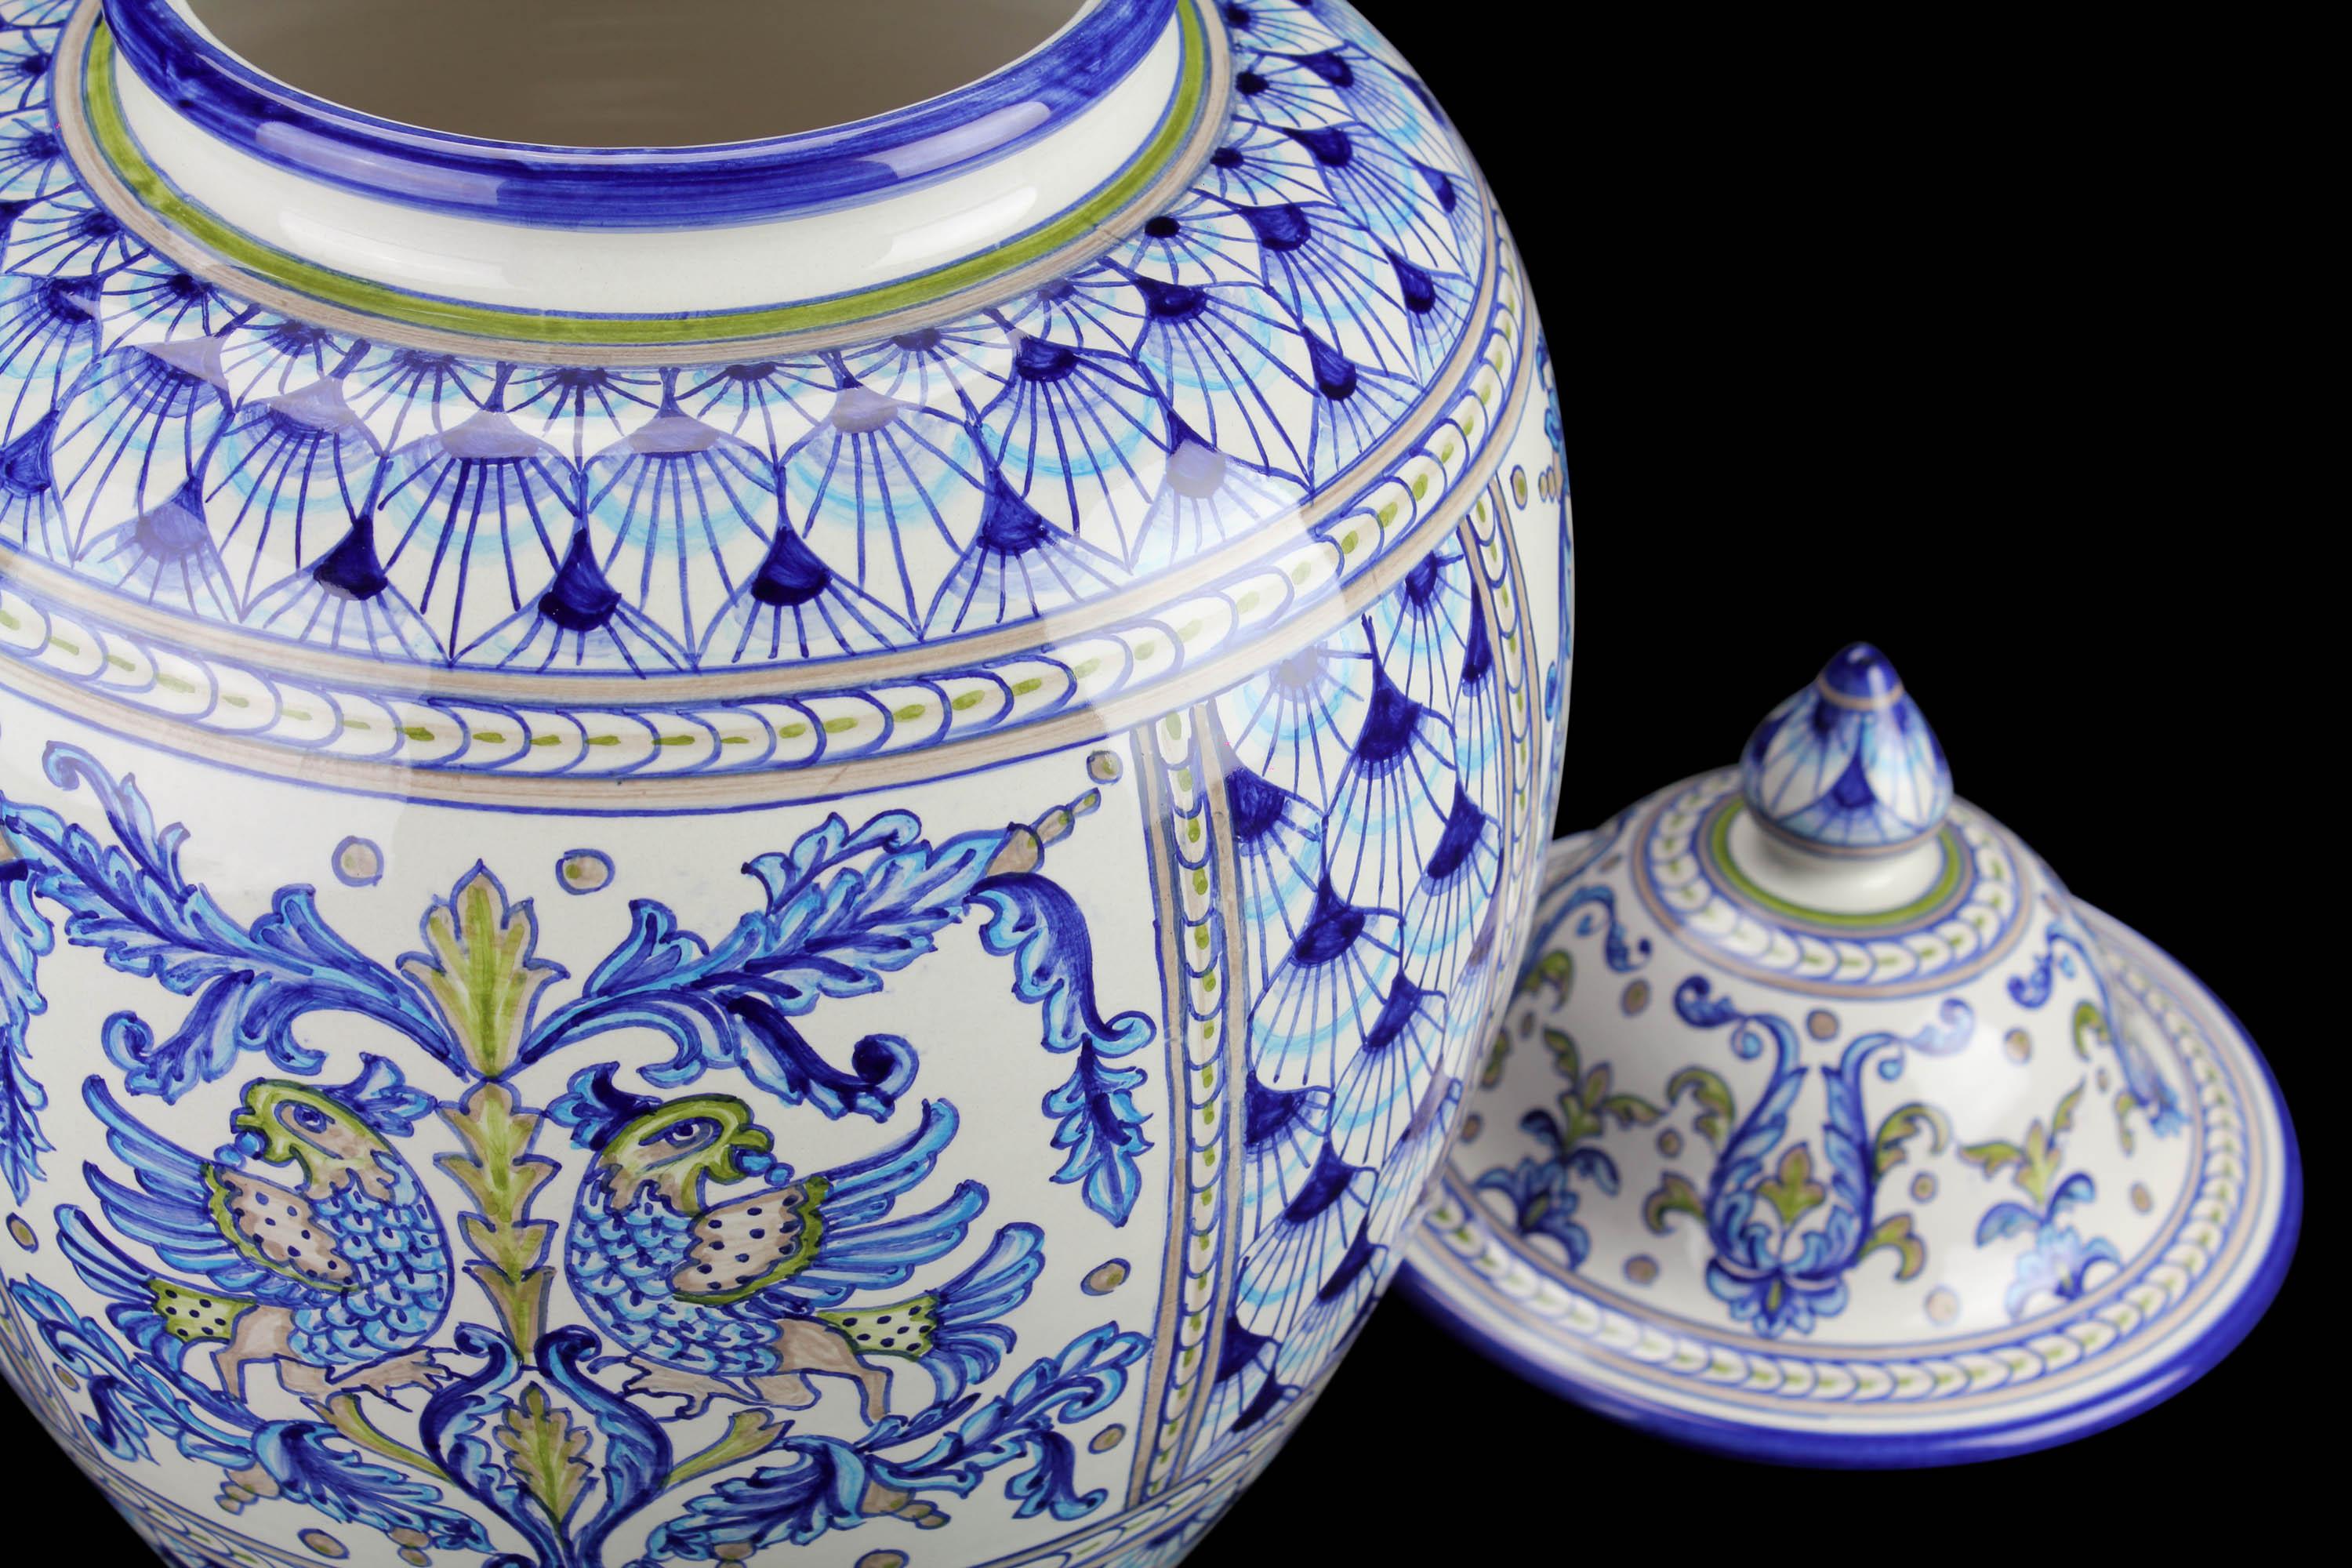 Hand-Crafted Blue Ceramic Potiche Centerpiece Vase Lid Majolica Hand Painted Deruta Italy For Sale